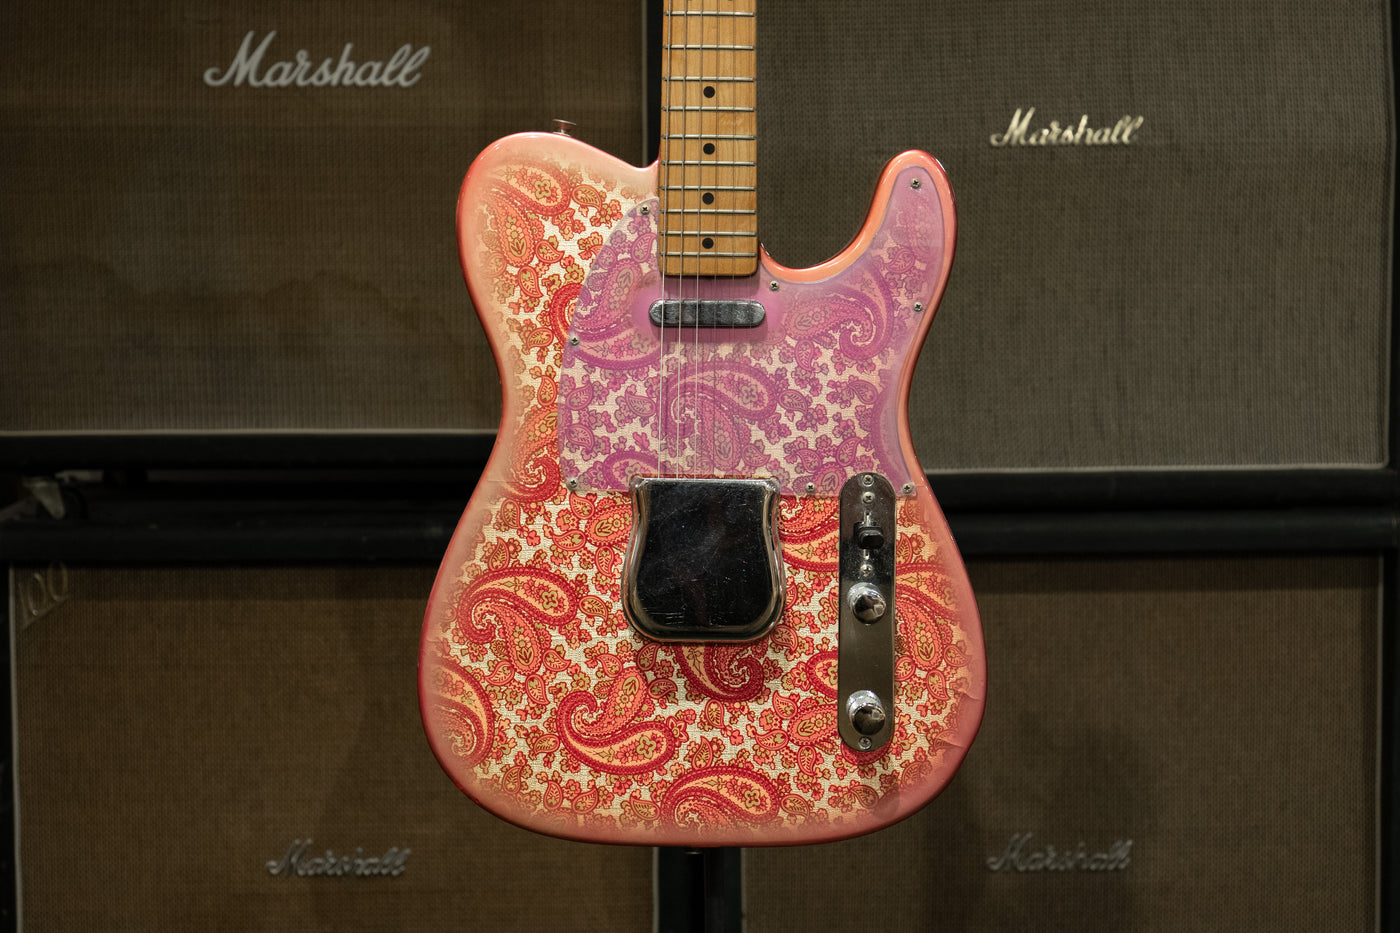 1968 Telecaster - Pink Paisley